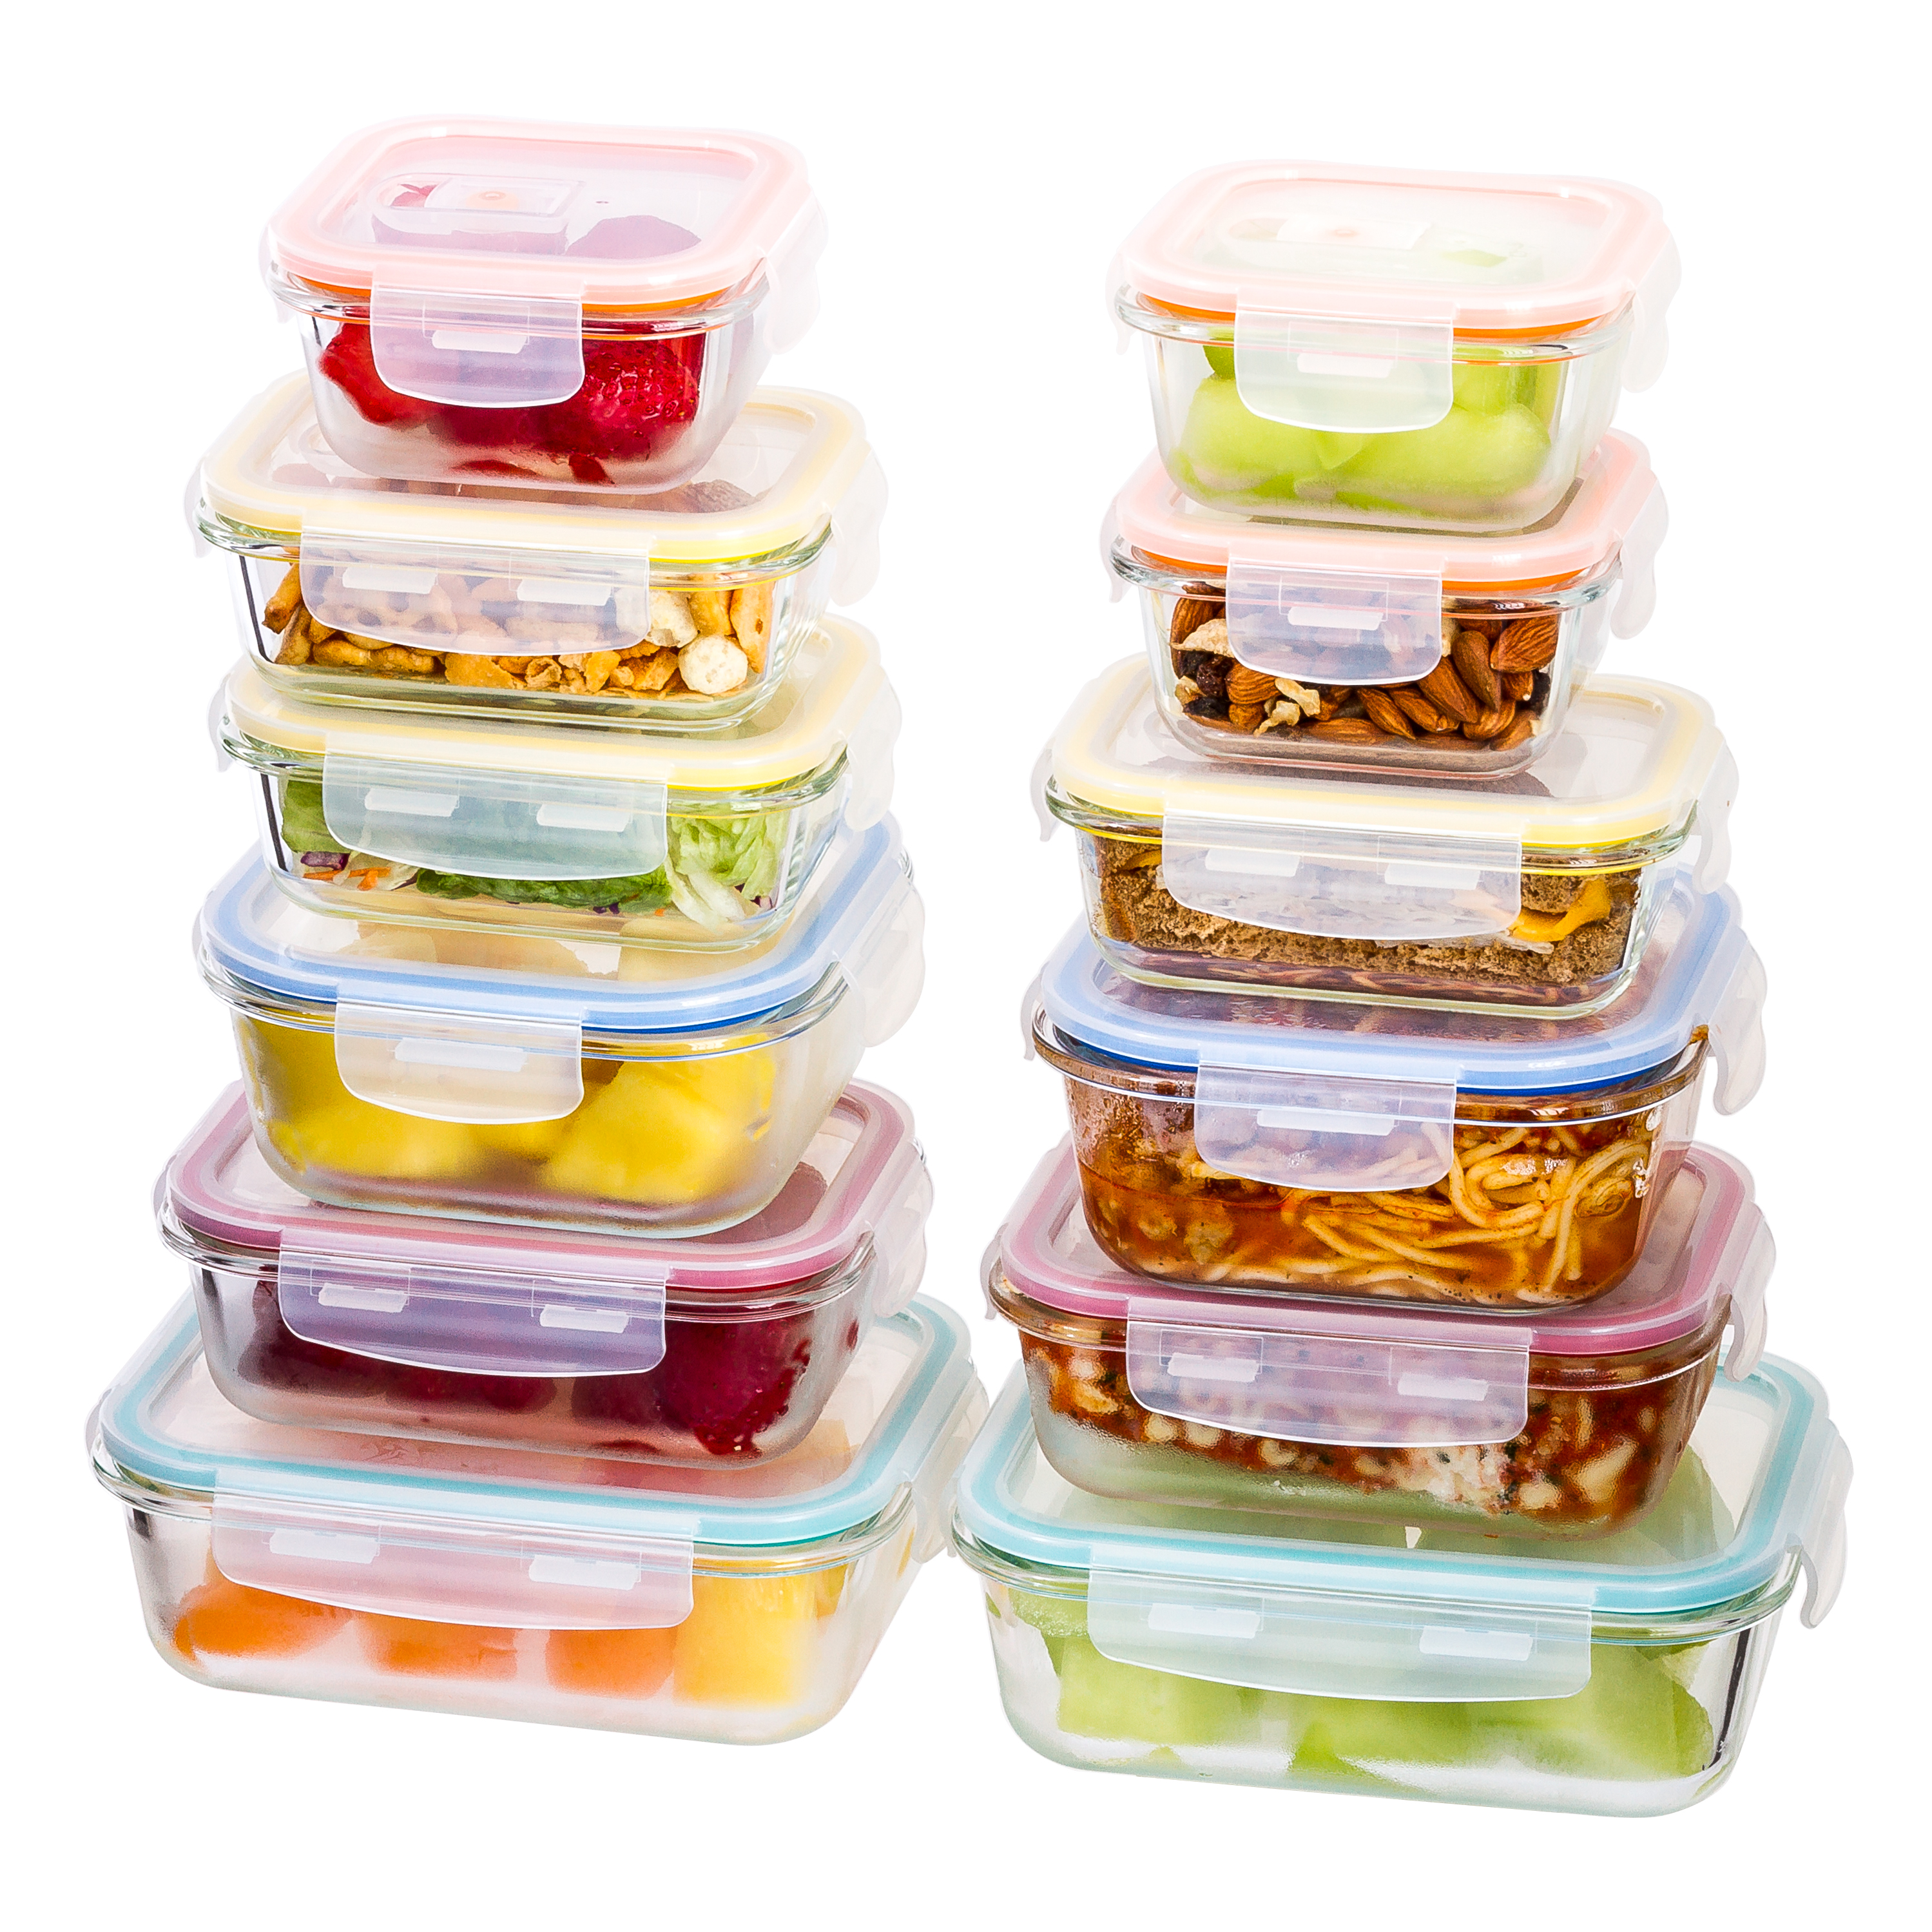 Imperial Home 24 pcs. Glass Meal Prep Storage Container Set W/ Snap Locking Lid - image 3 of 8